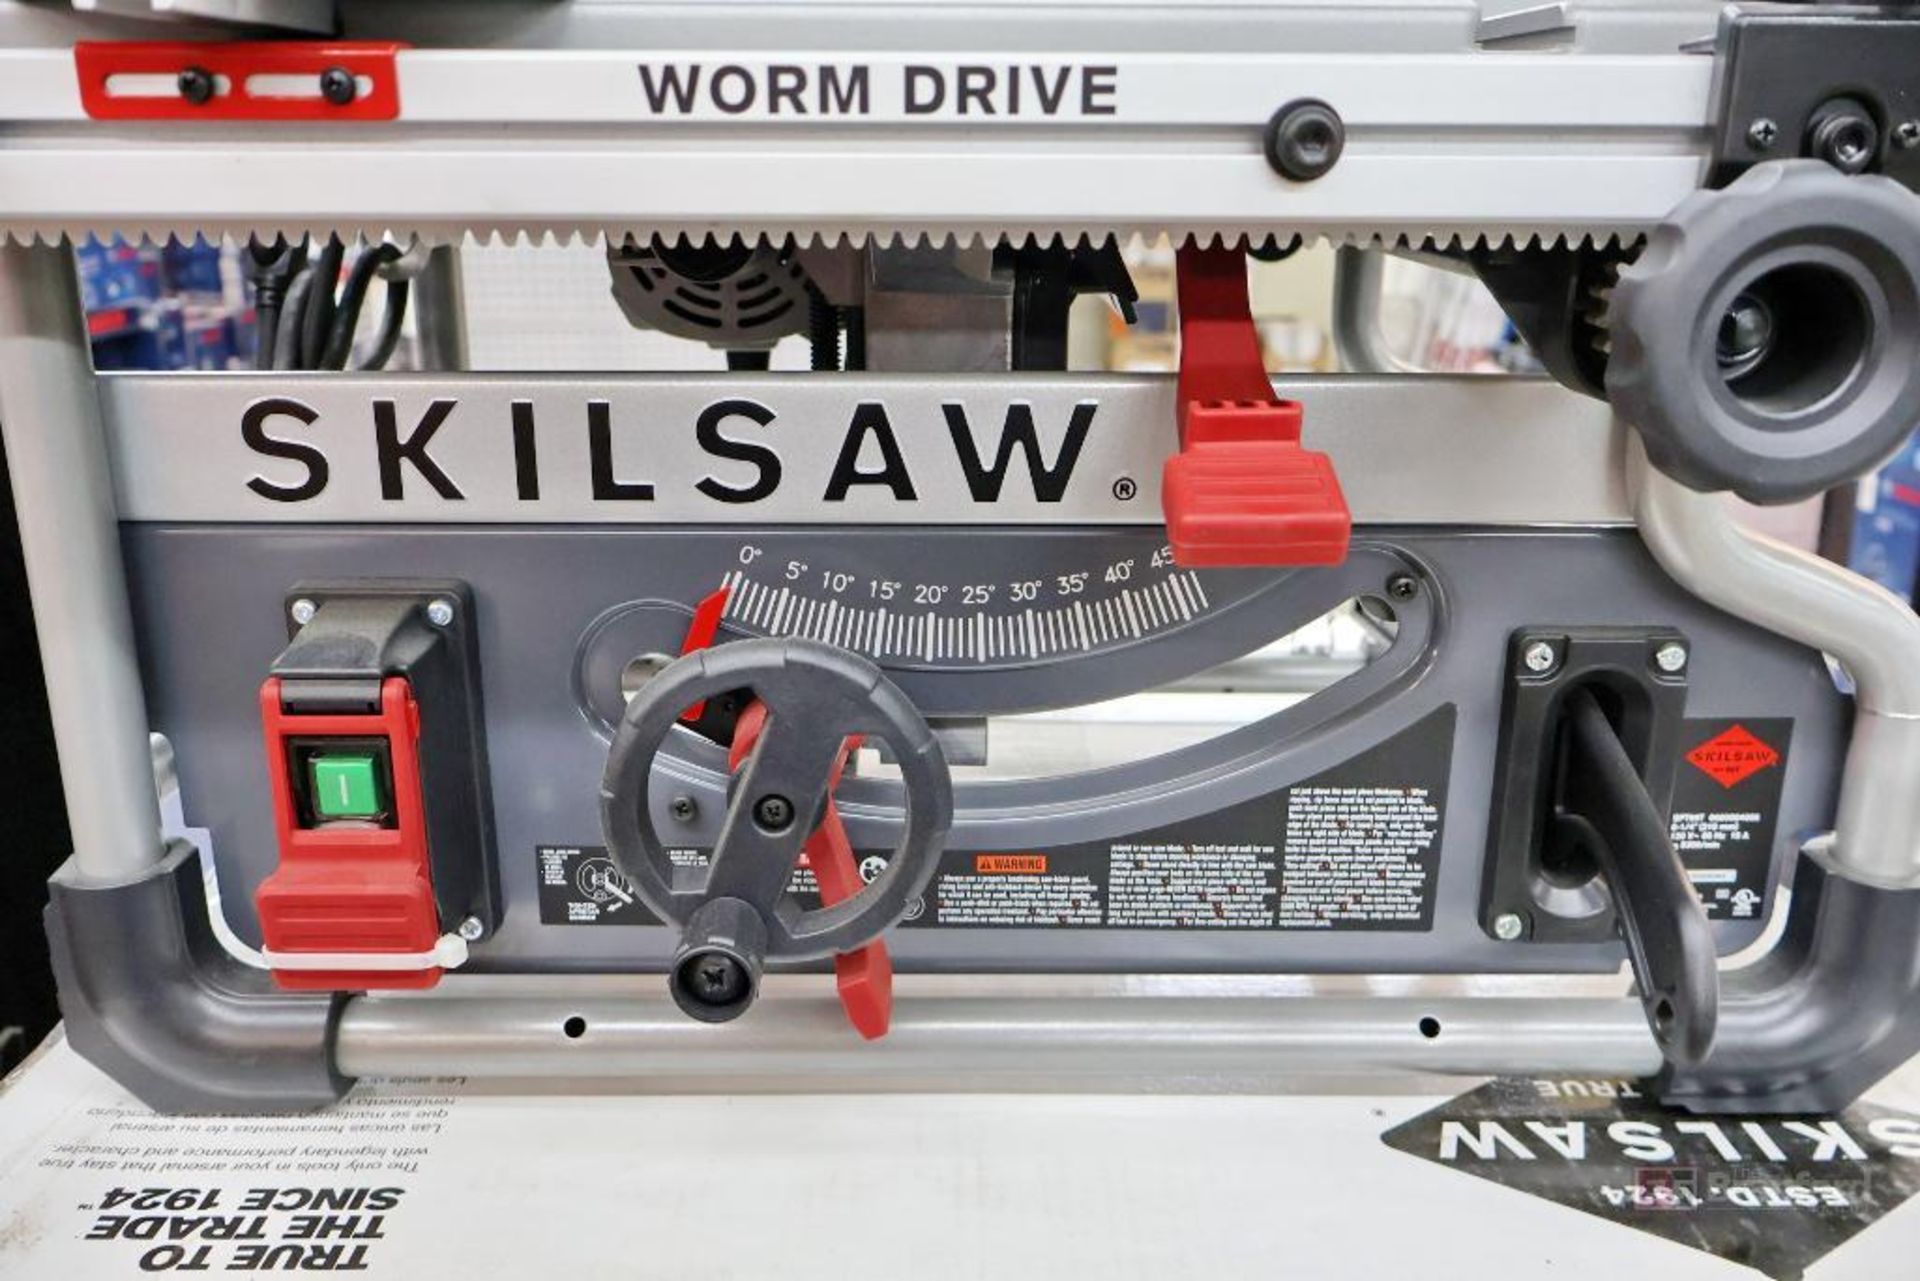 SKILSAW SPT 99 T-01 Portable Worm Drive Table Saw - Image 4 of 8